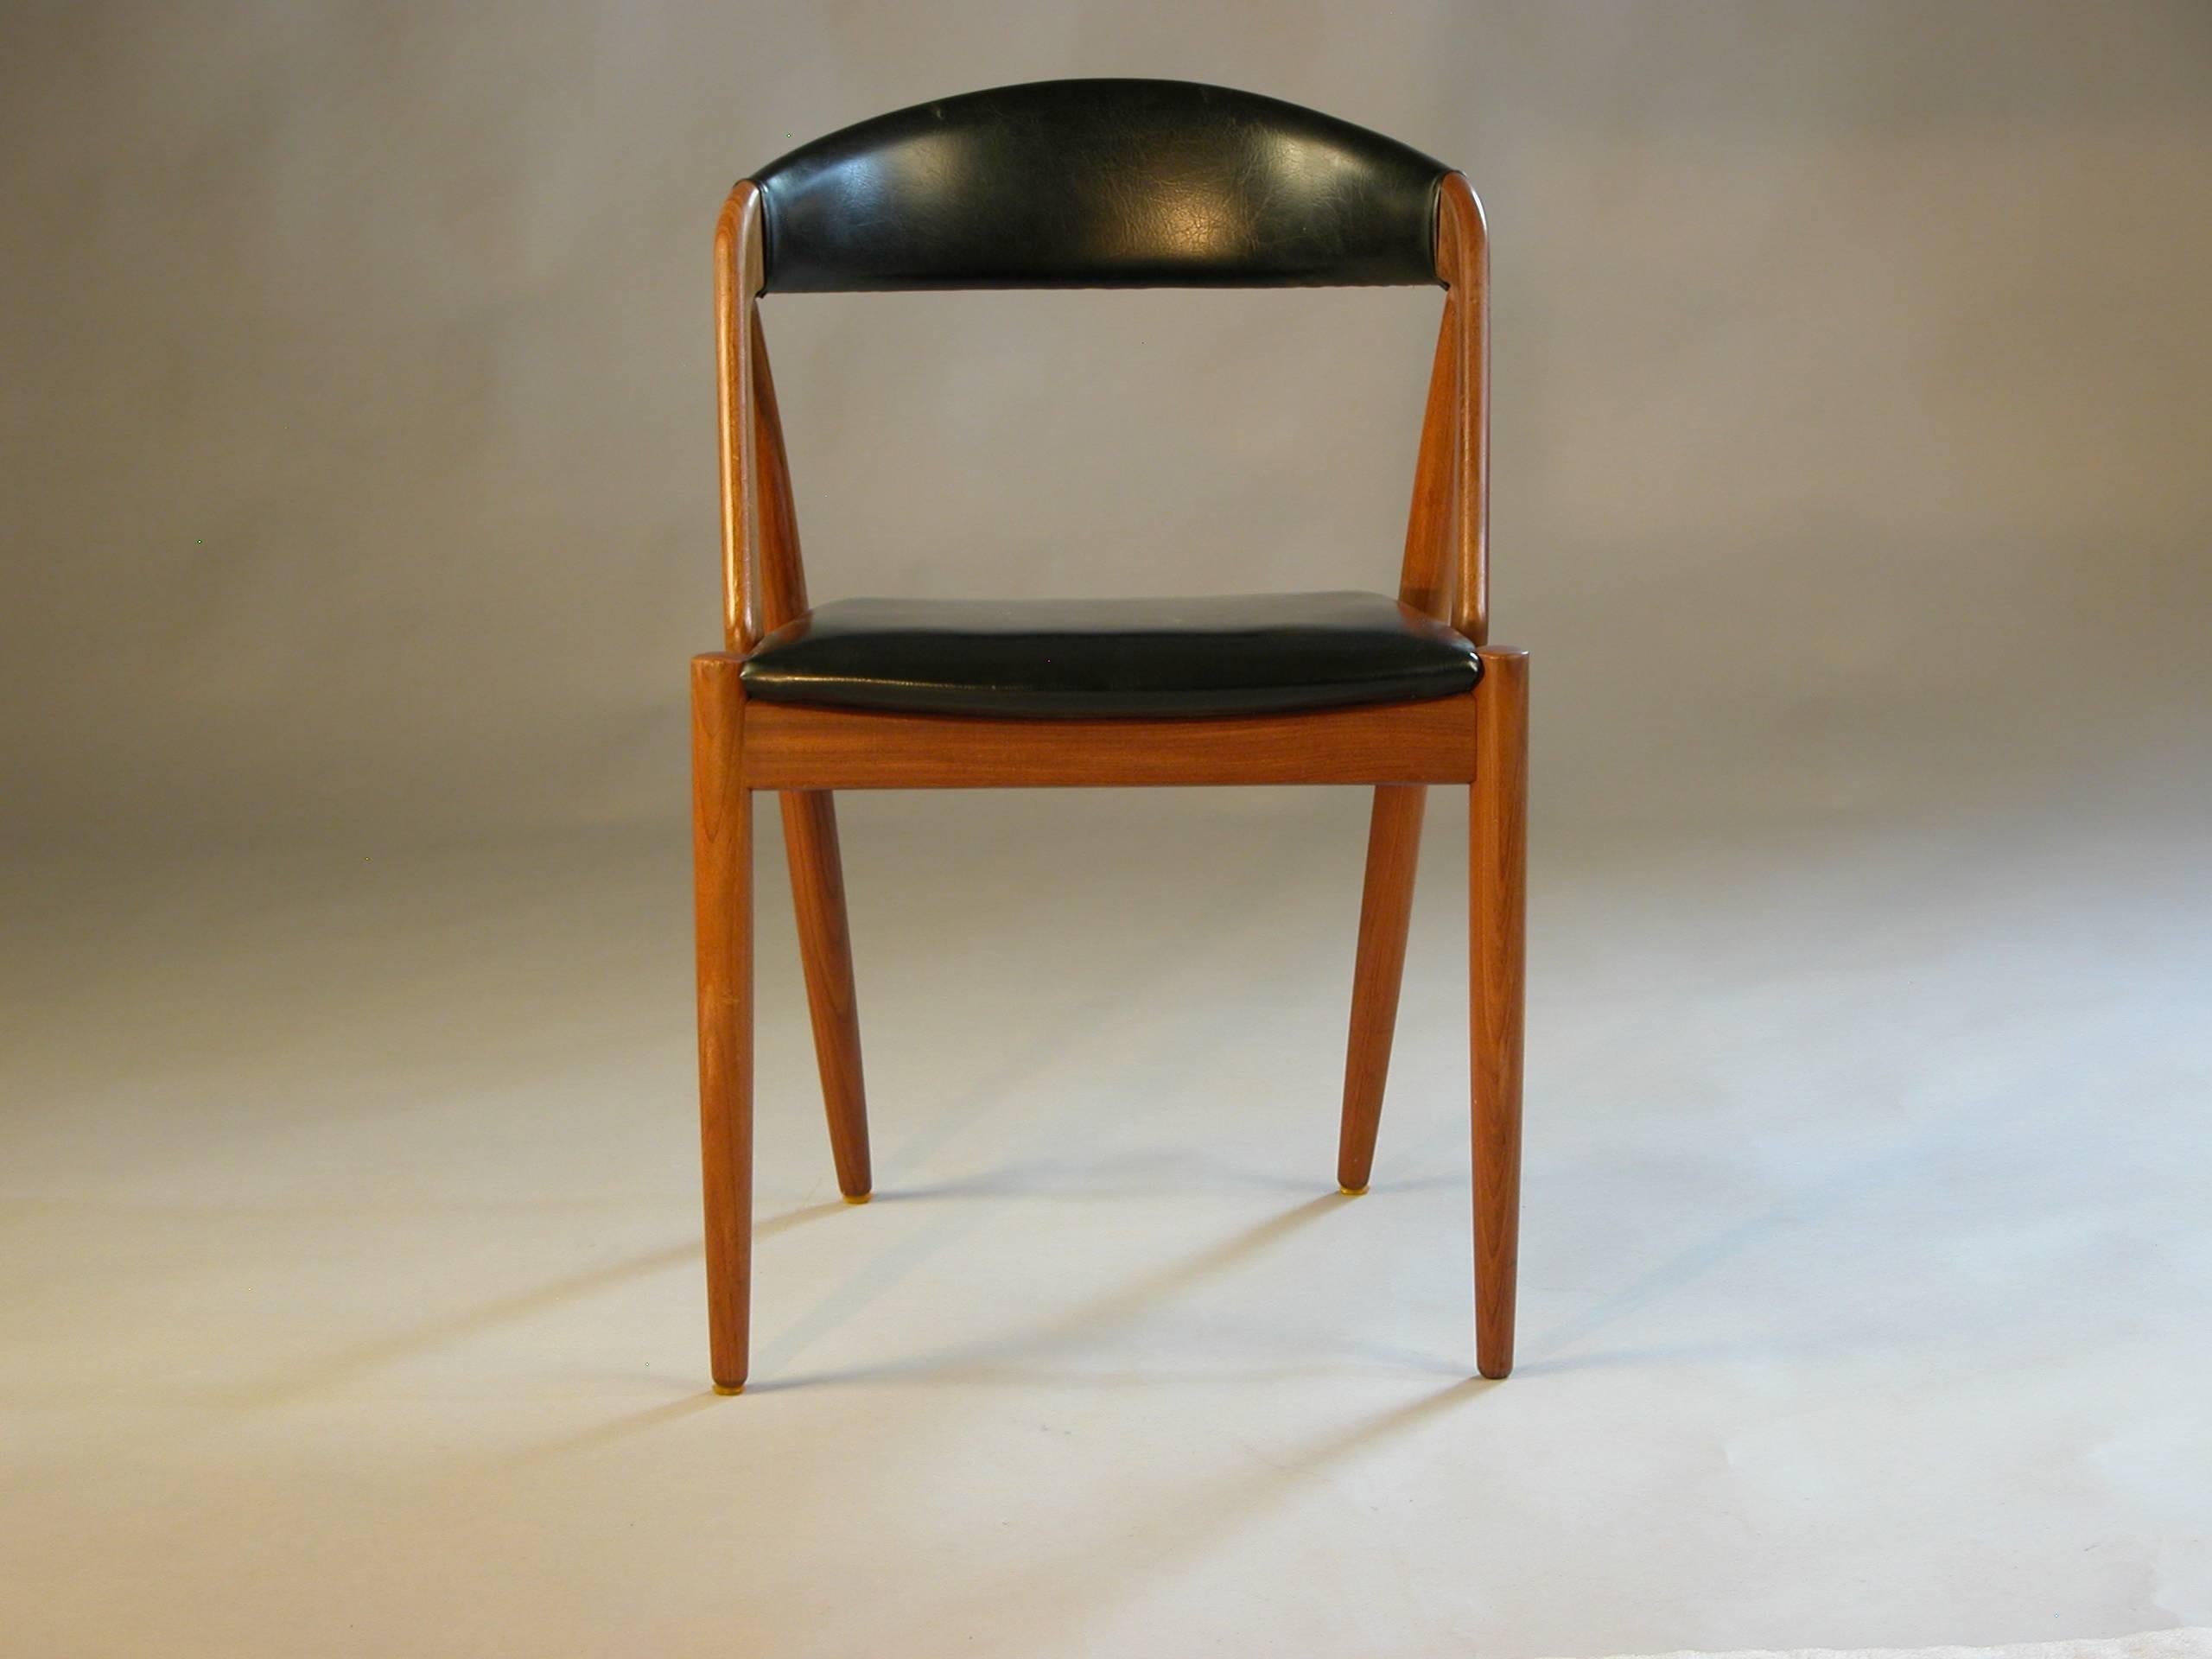 The A-frame model 31 chairs were designed by Kai Kristiansen in 1956. The model 31 chair with it´s curved, straight and oblique lines and comfortable seats are one of the most well-known Kai Kristiansen designs. The chairs will be reupholstered in